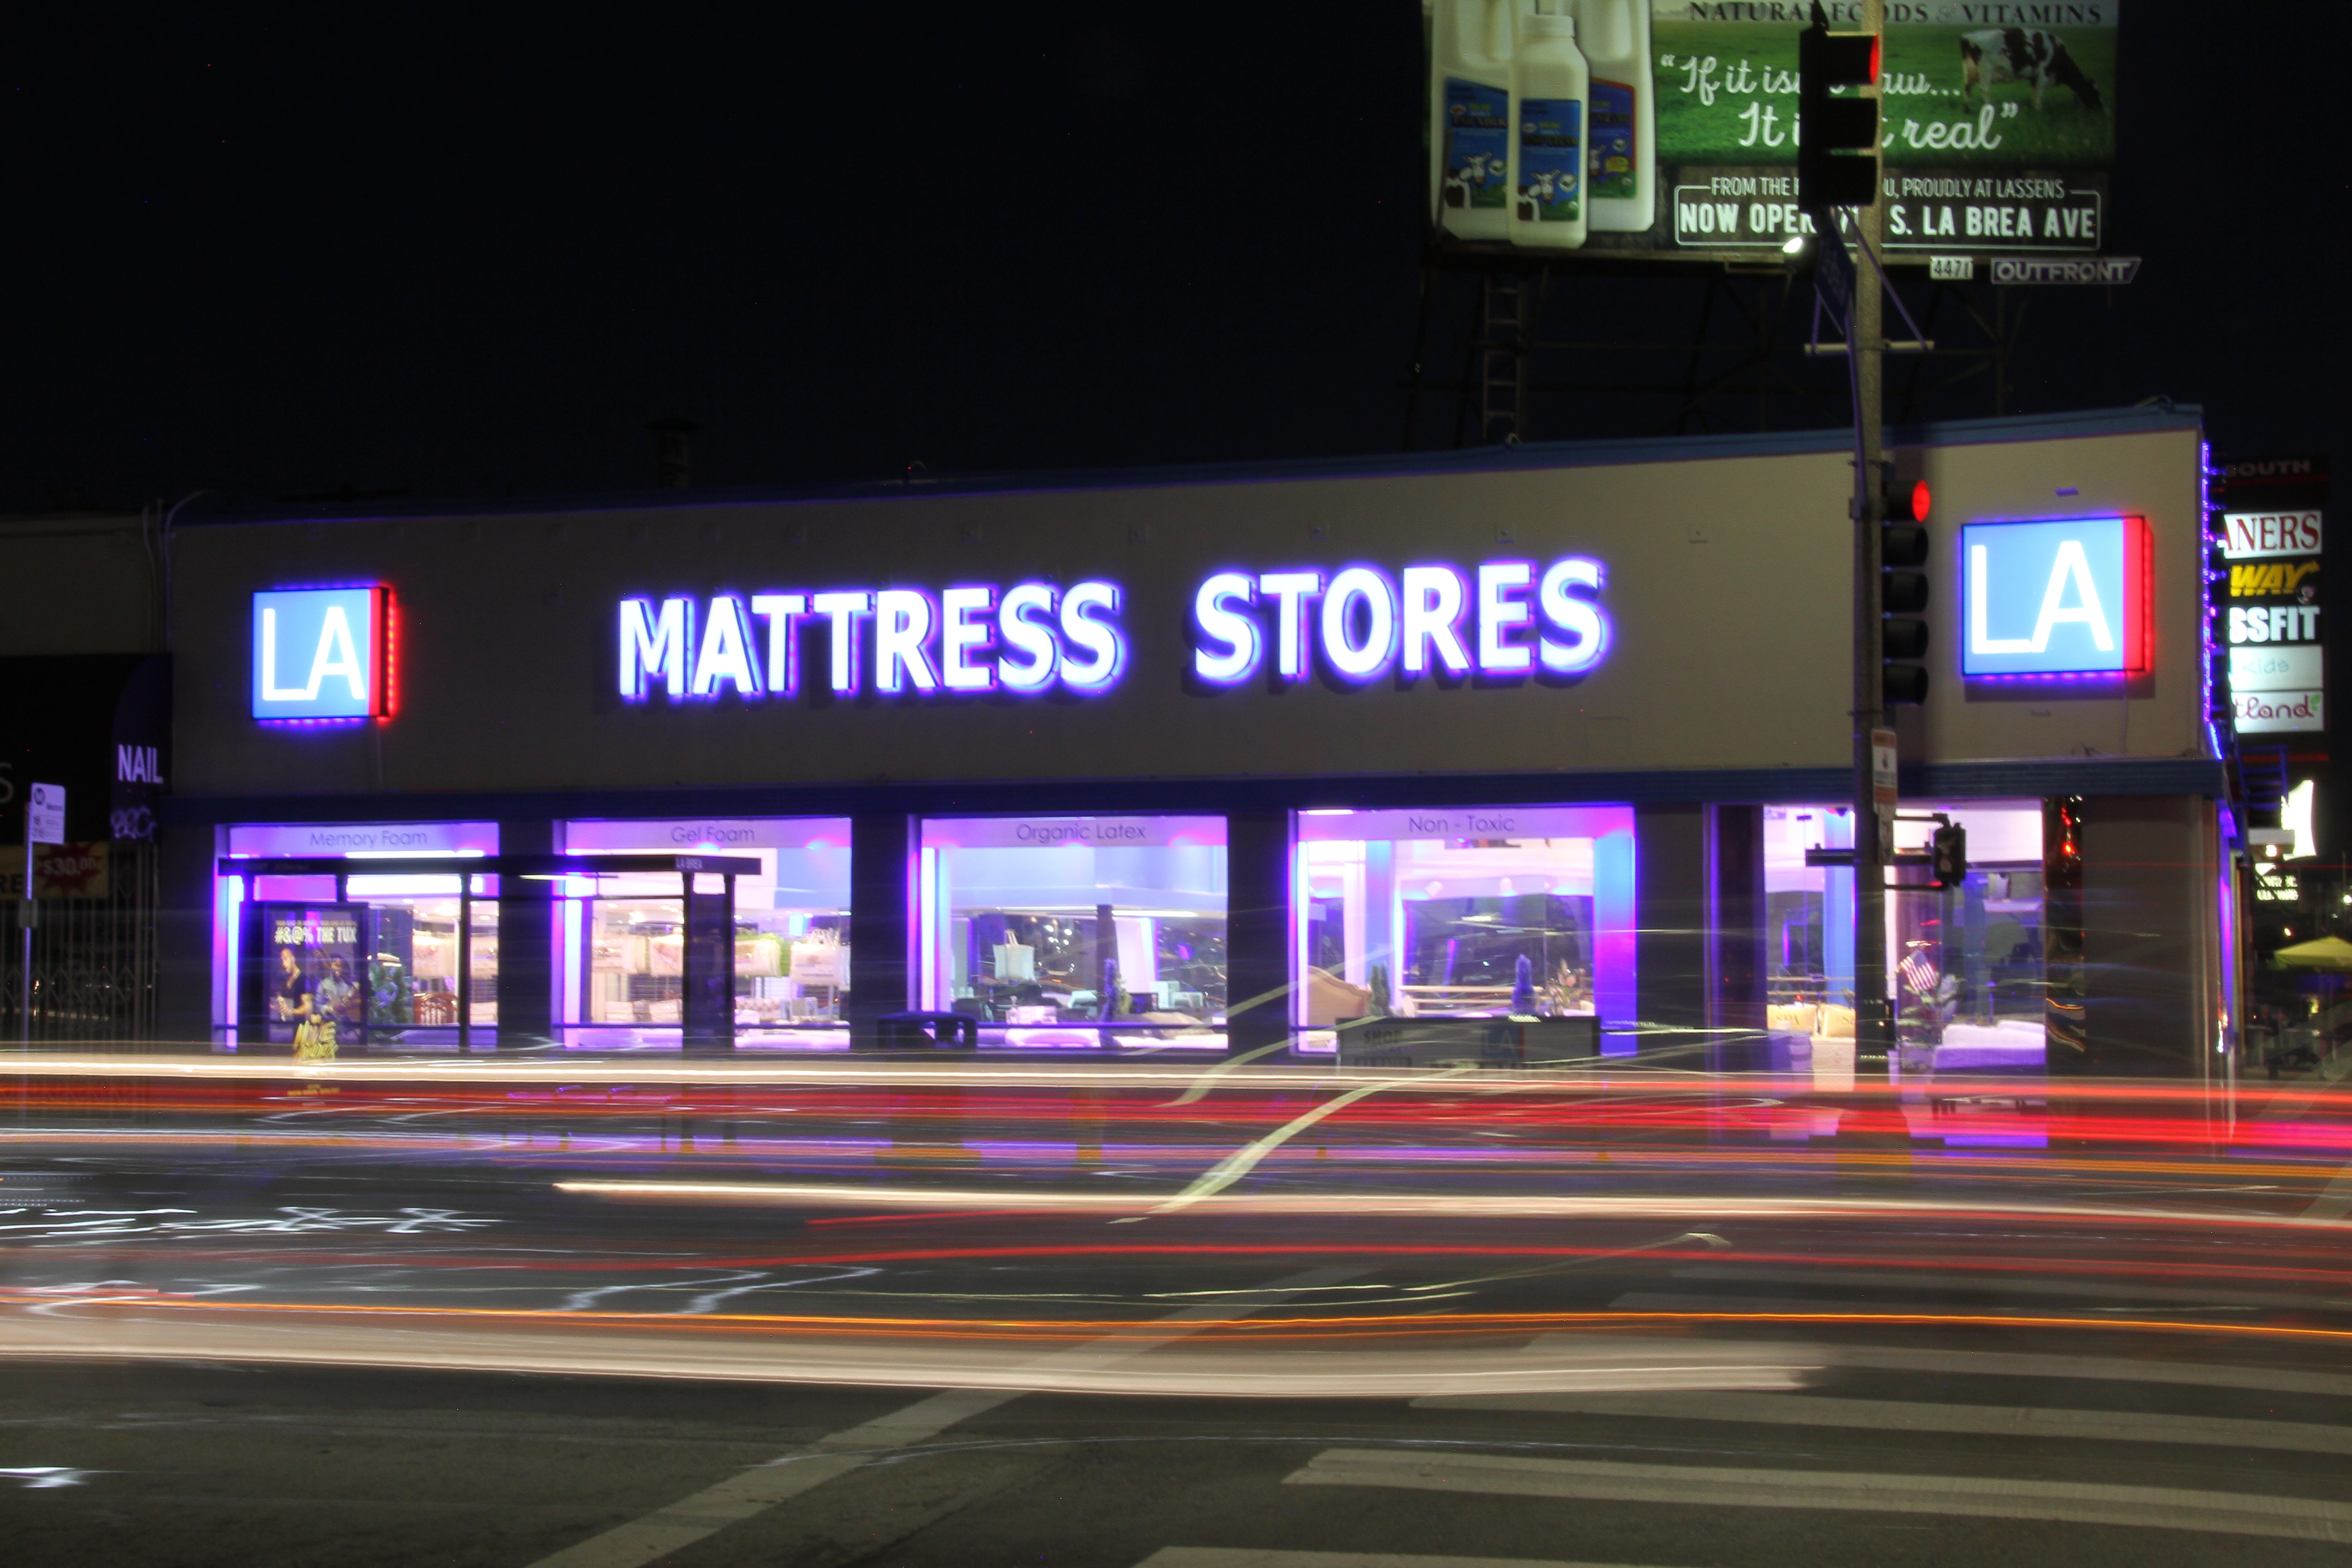 Discover the Ultimate Mattress Shopping Experience at LA Mattress Stores - Guided by Sleep Experts!